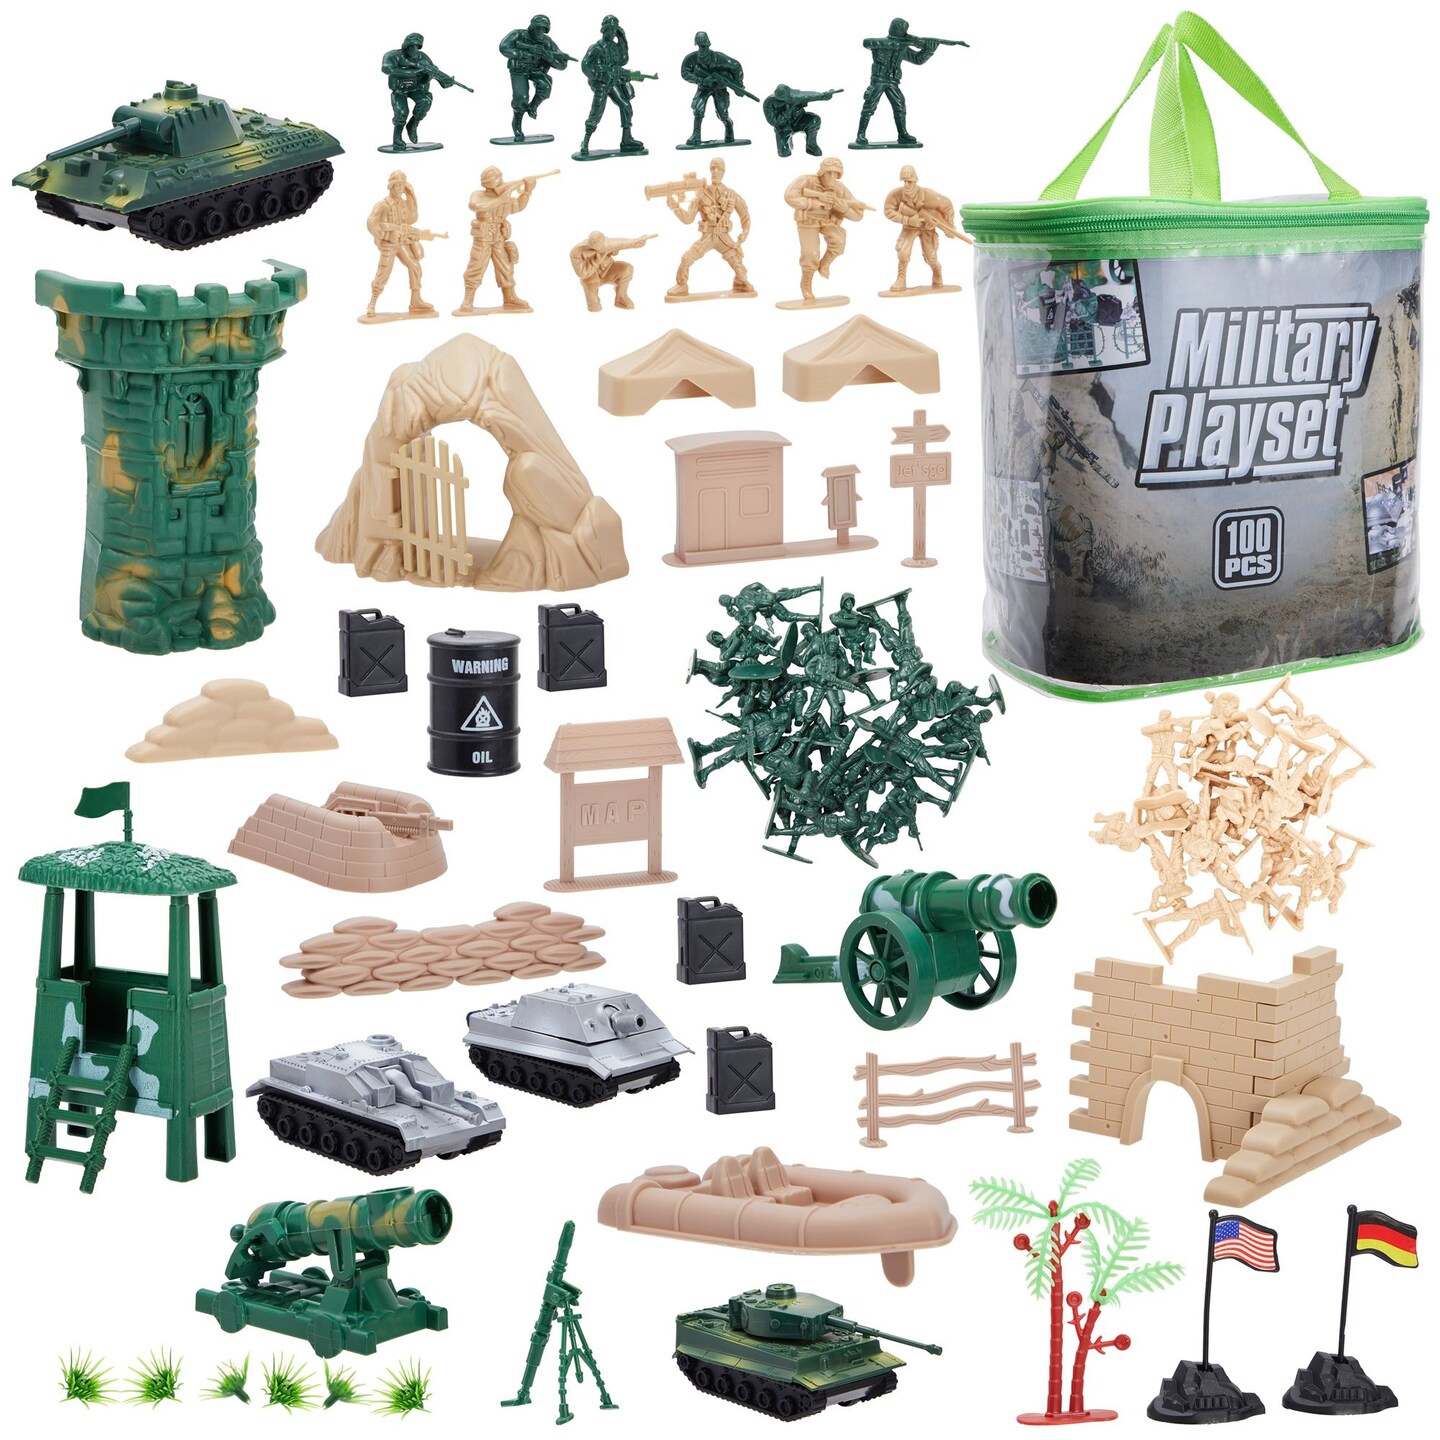 100-Piece Army Men Toy Soldiers Playset for Boys &#x2013; Small Plastic Action Figures, Military Battlefield Fort Accessories, Tanks